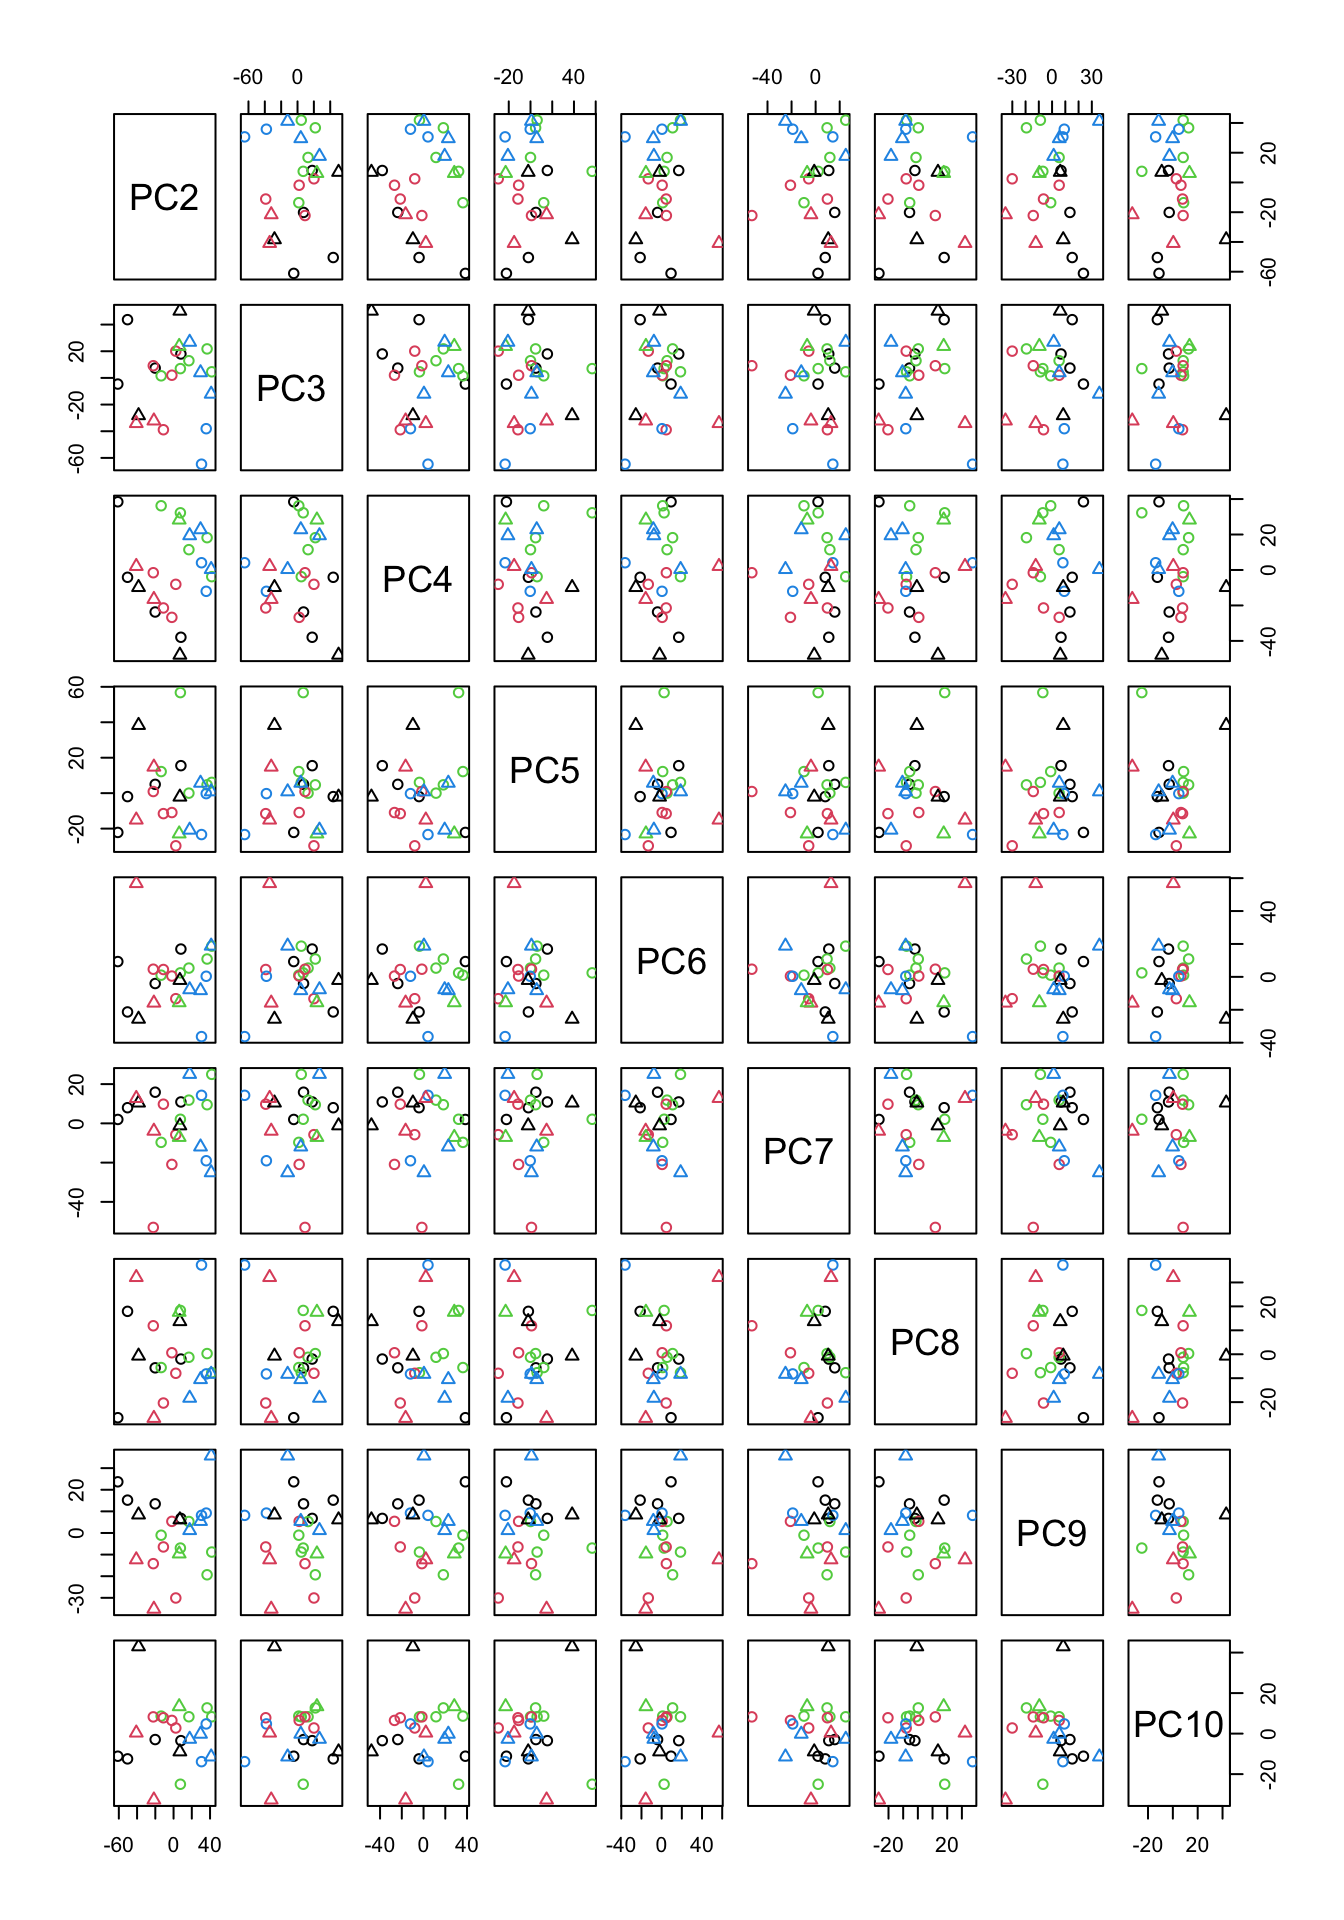 PCA of the data using up to ten components